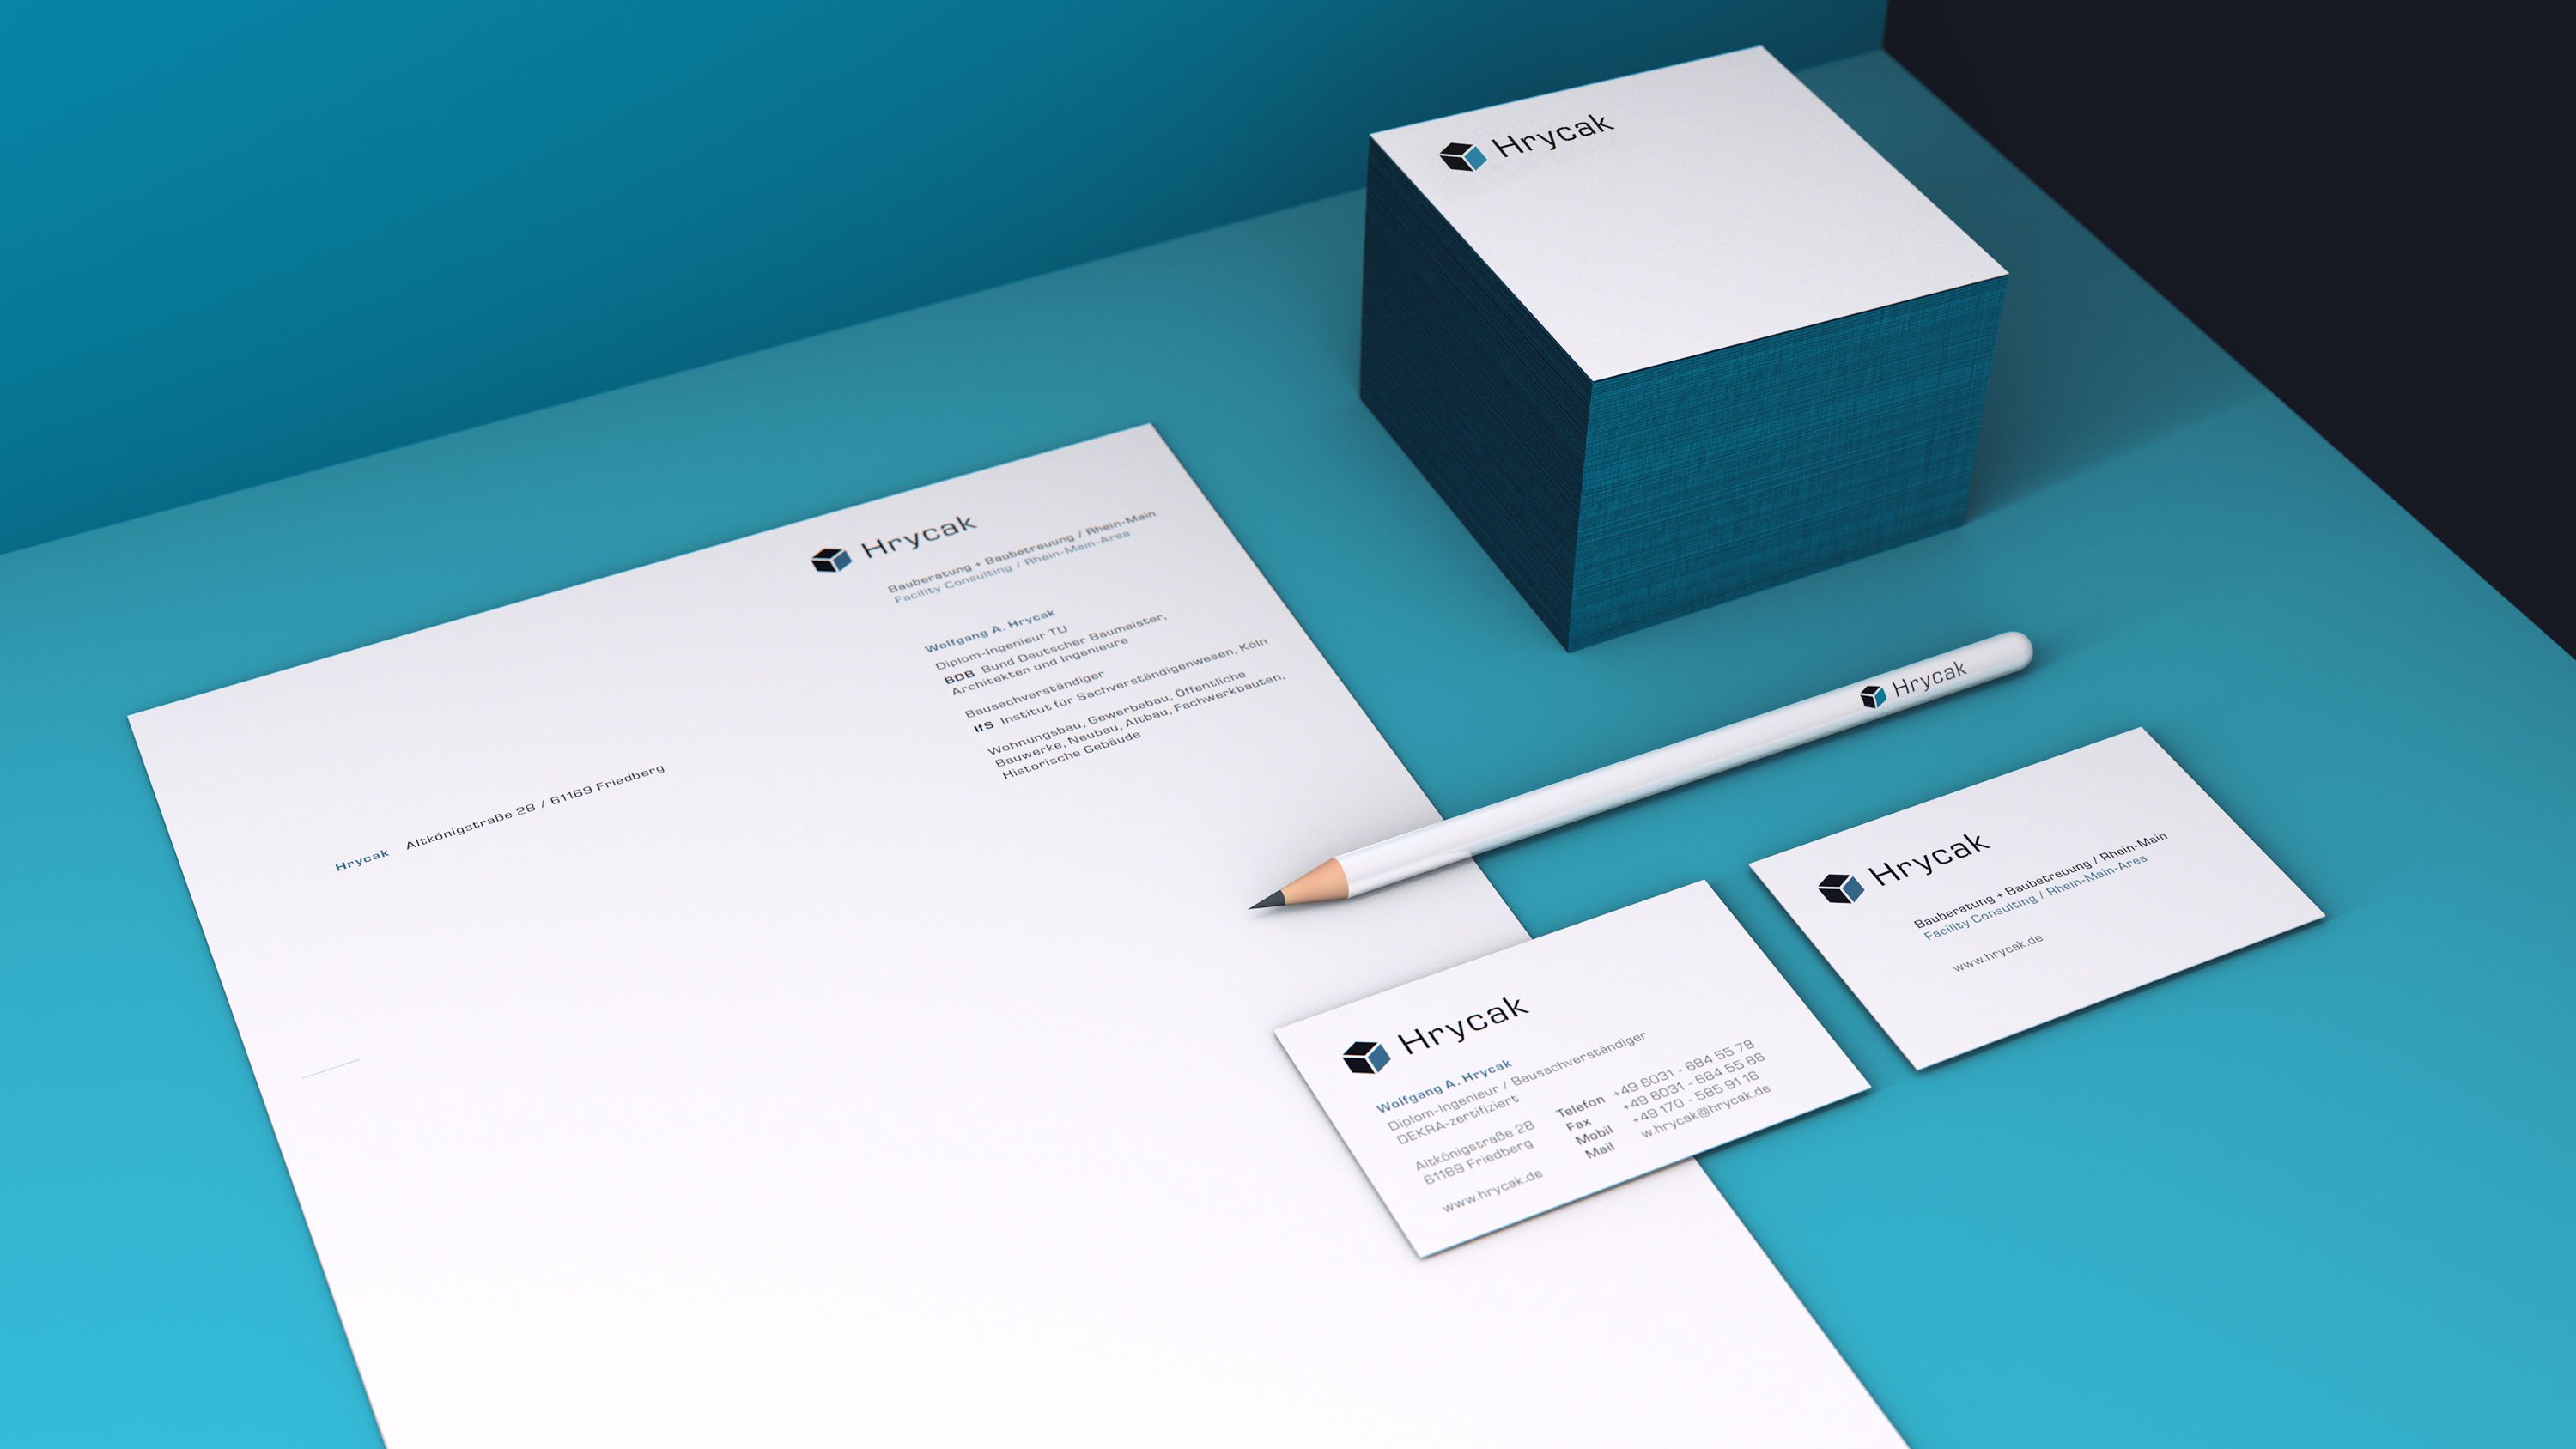 Corporate design, biref paper and business cards for Hrycak Consulting: DIE NEUDENKER® Agency, Darmstadt